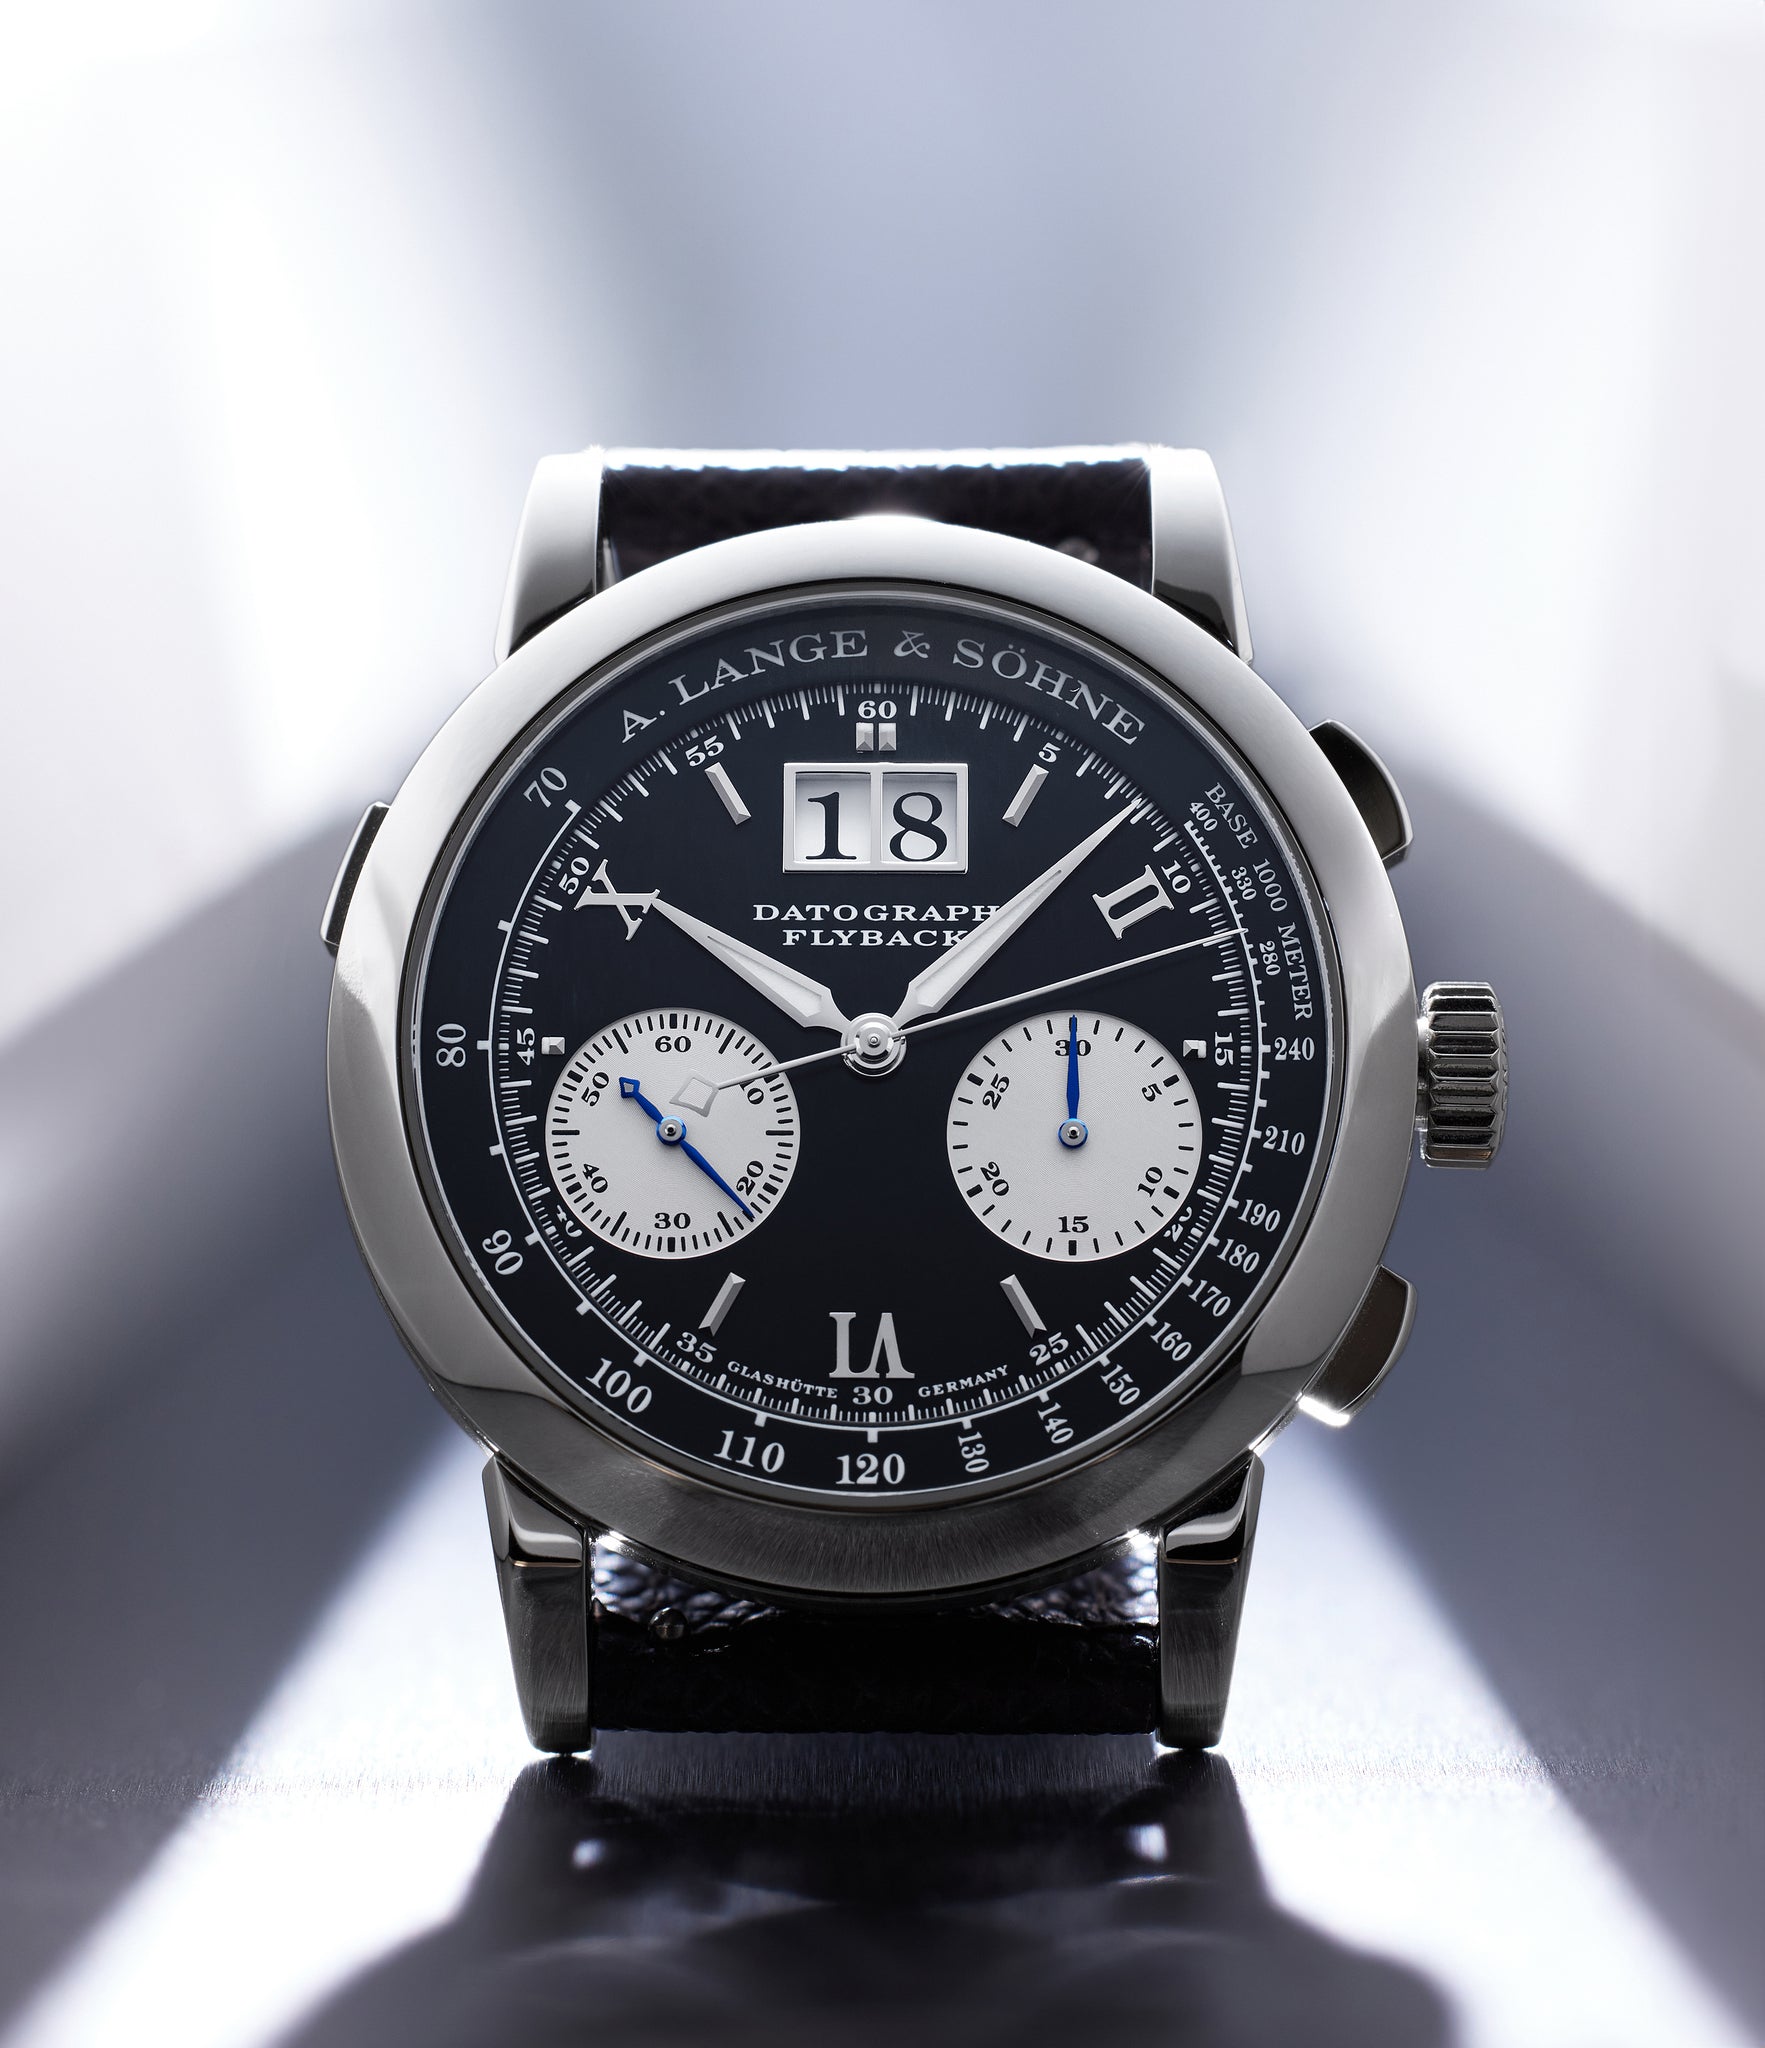 Datograph 403.035F A. Lange & Söhne Platinum preowned watch at A Collected Man London